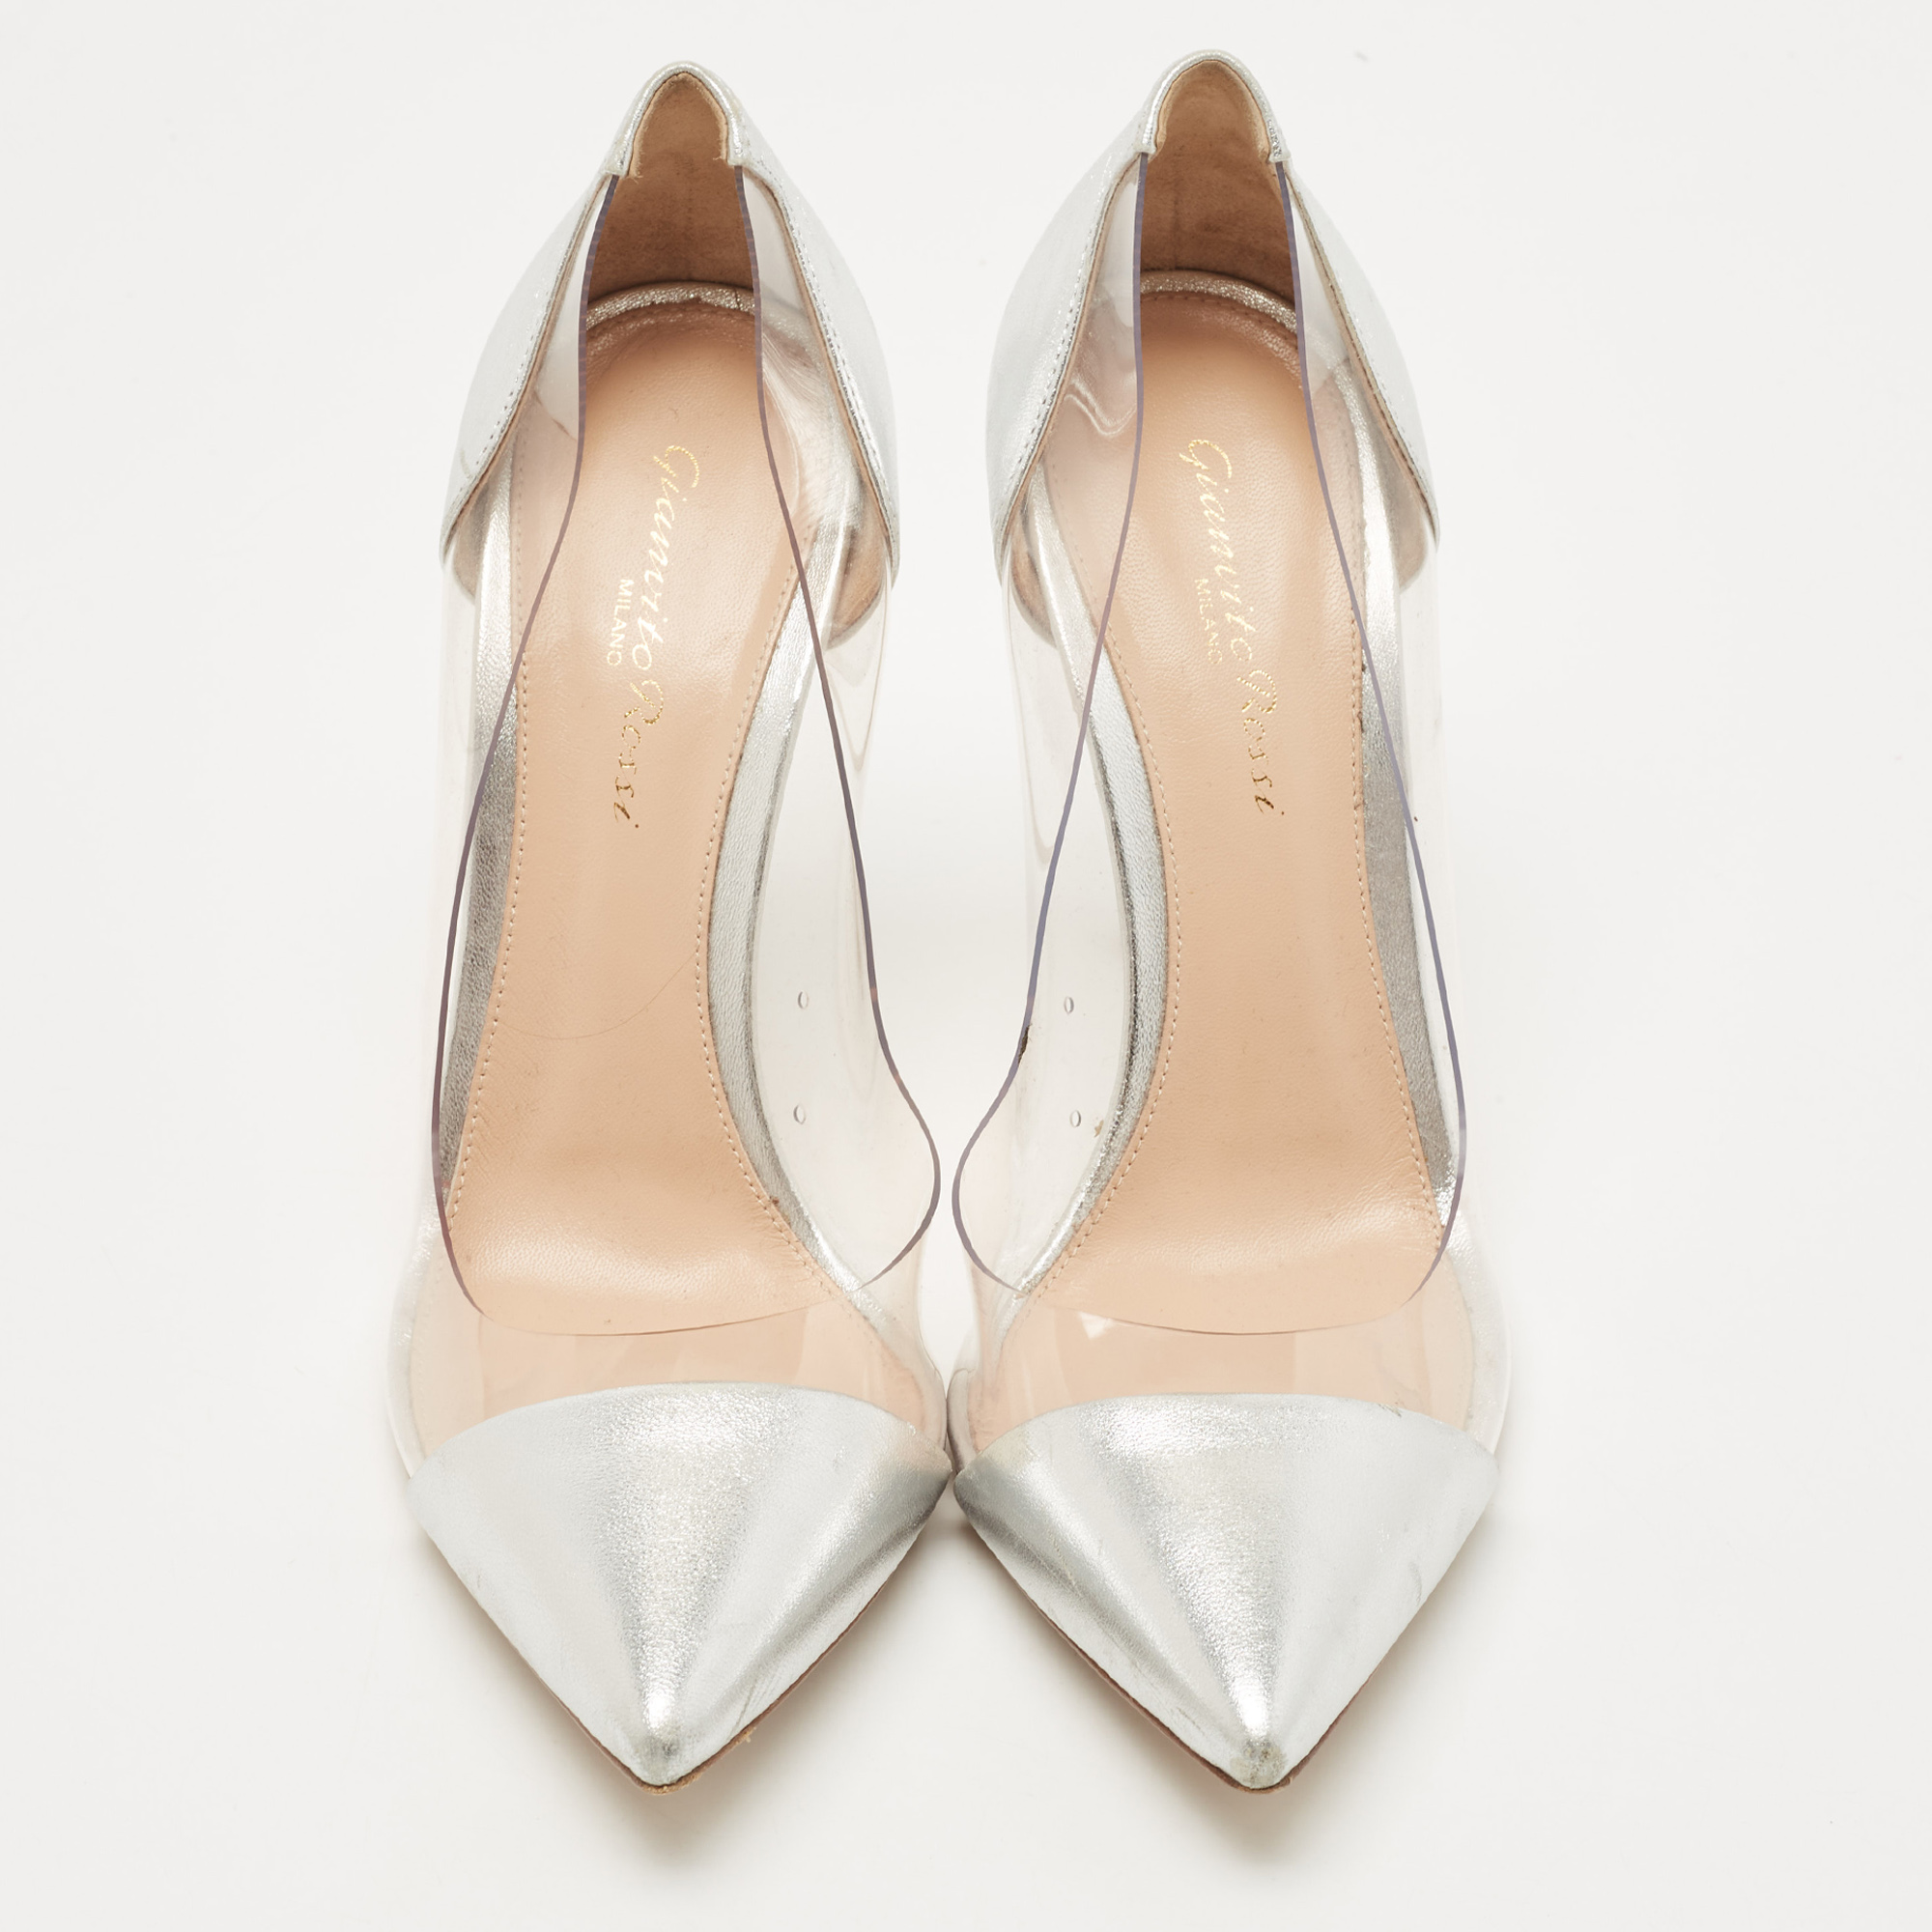 Gianvito Rossi Silver Leather And PVC Plexi Pointed Toe Pumps Size 38